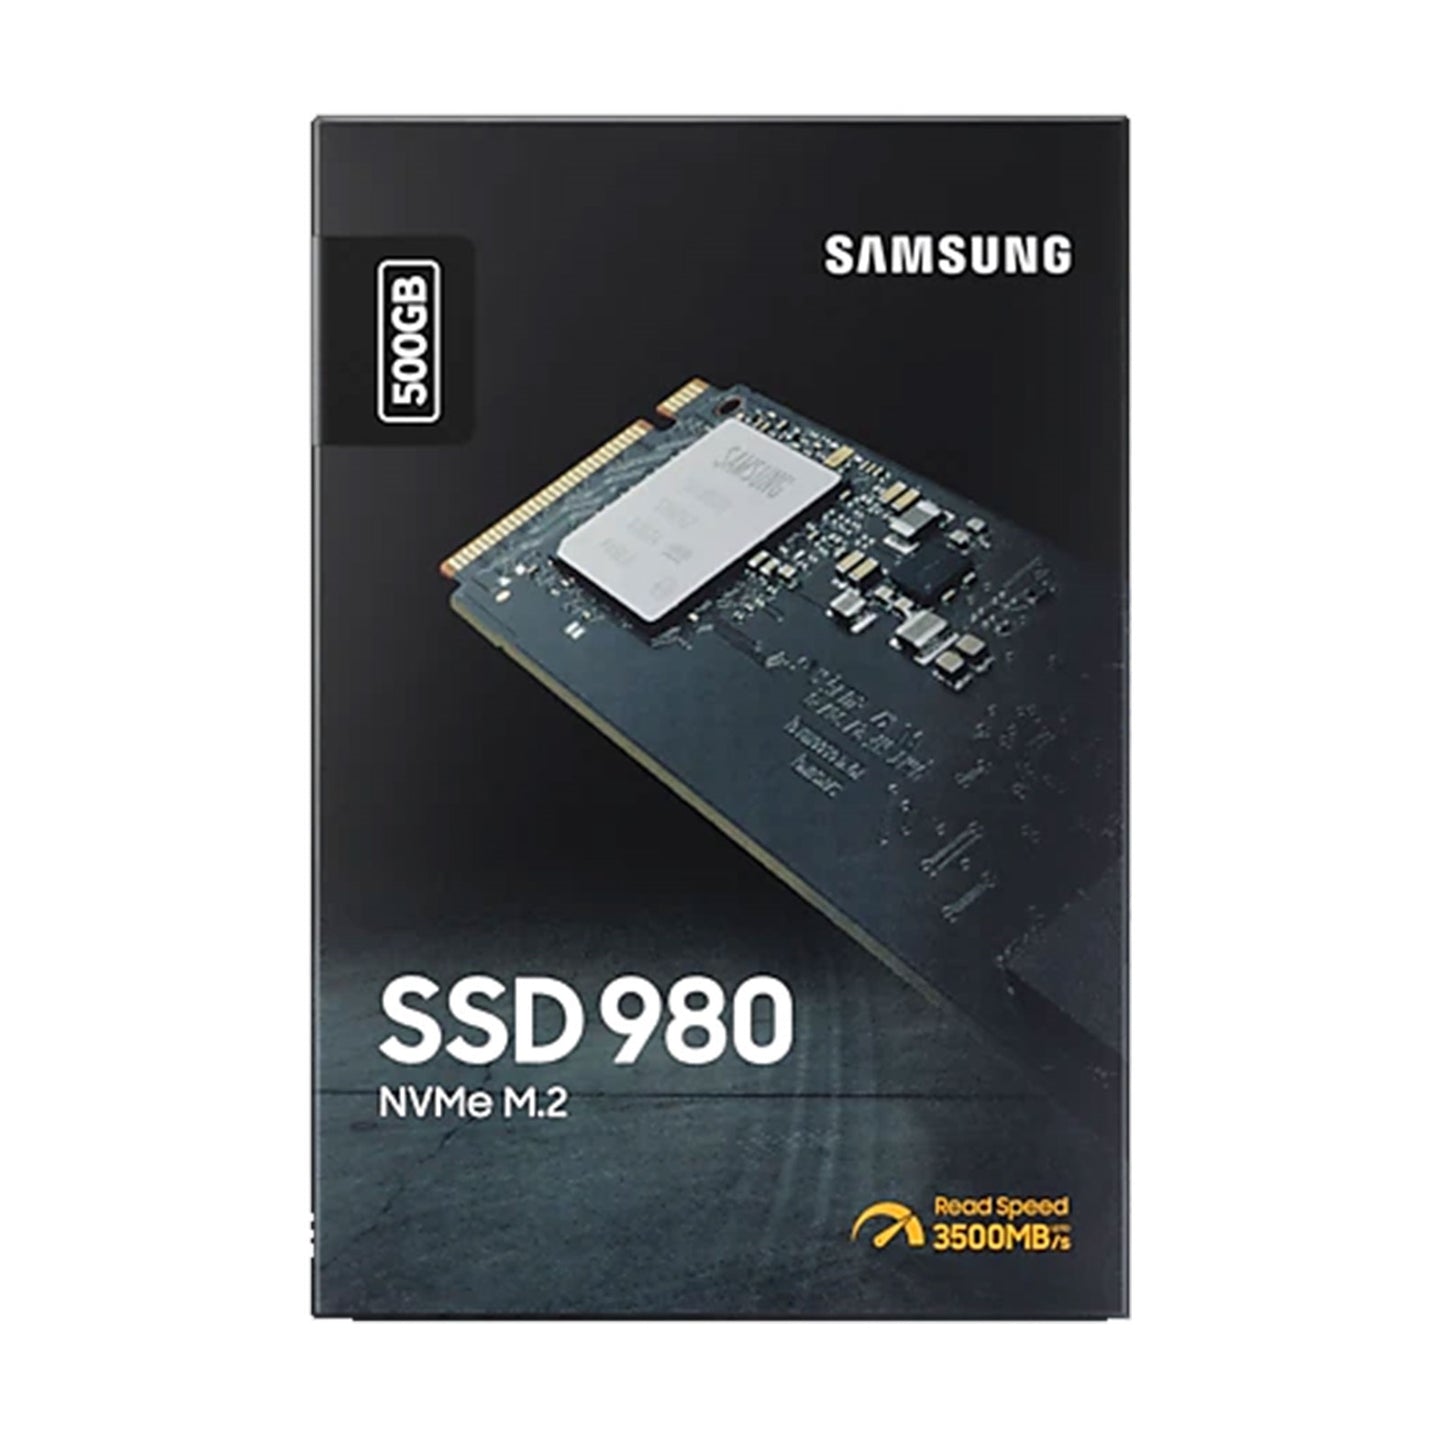 Samsung 980 500GB M.2 PCIe NVMe PCIe 3.0 SSD / Solid State Drive 3,500 Read / 3,000 MB/s Write